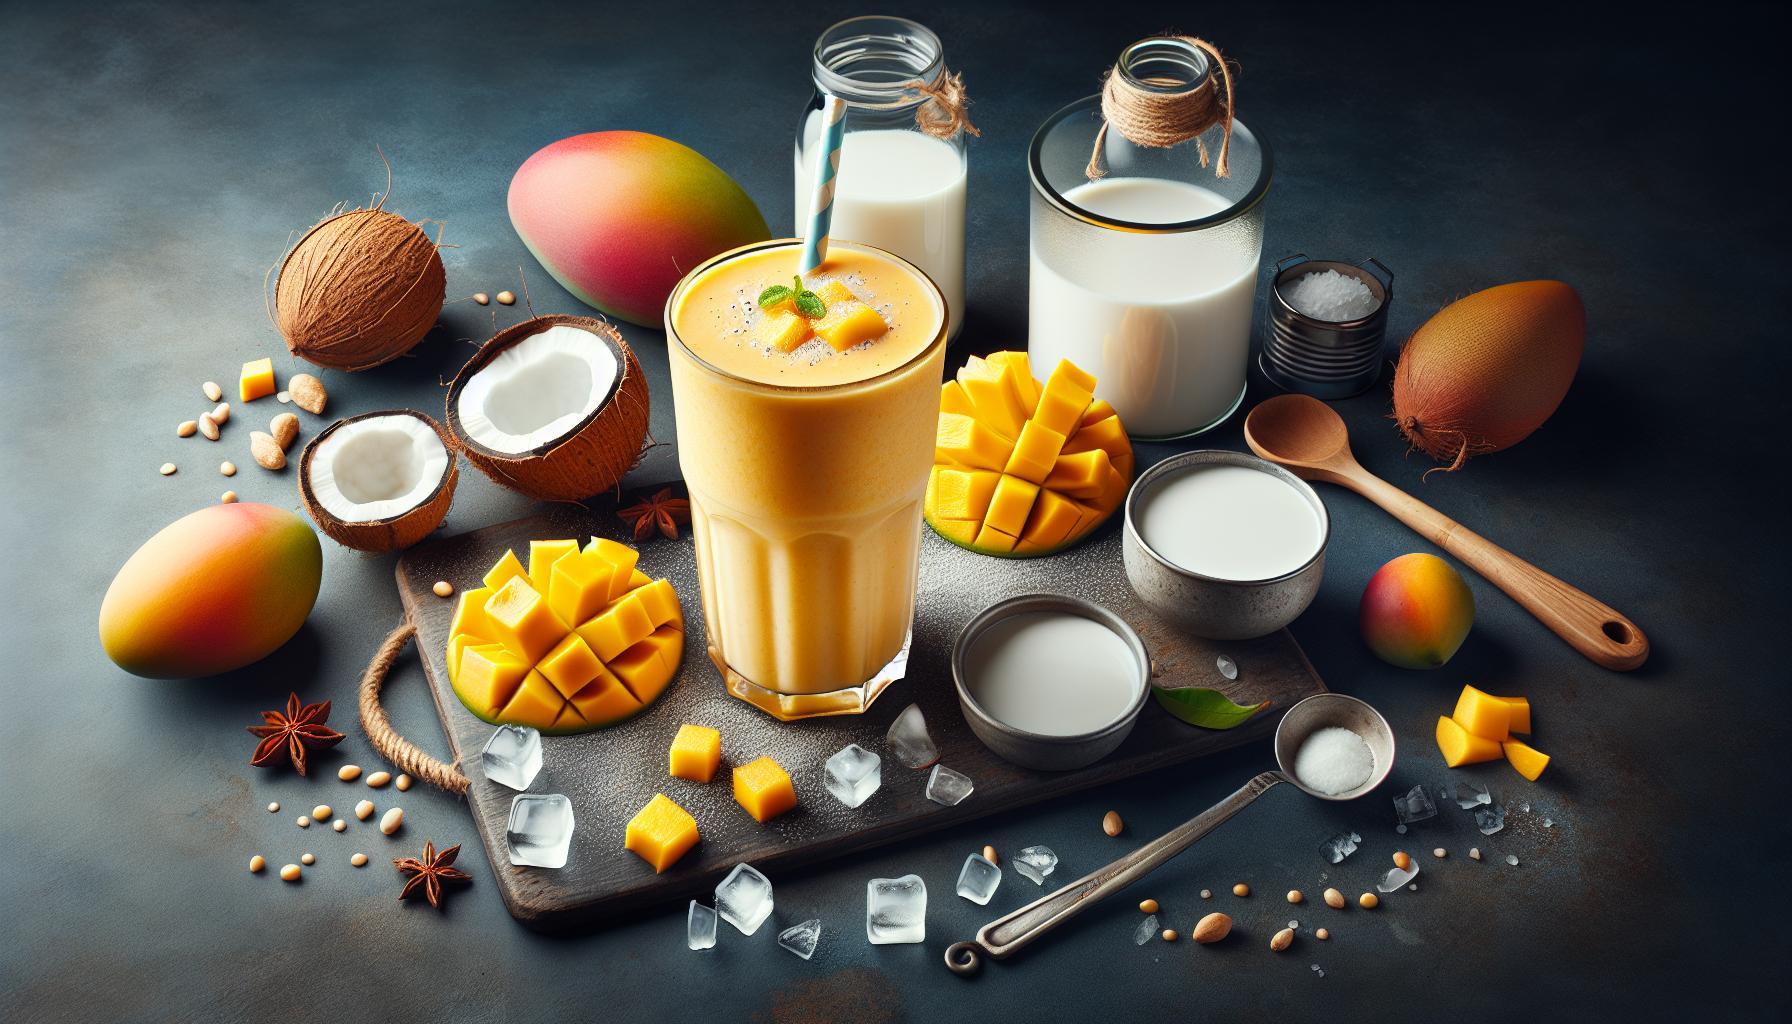 Tropical Bliss: Mango and Coconut Milk Smoothie Recipe – A Paradise in Every Sip!